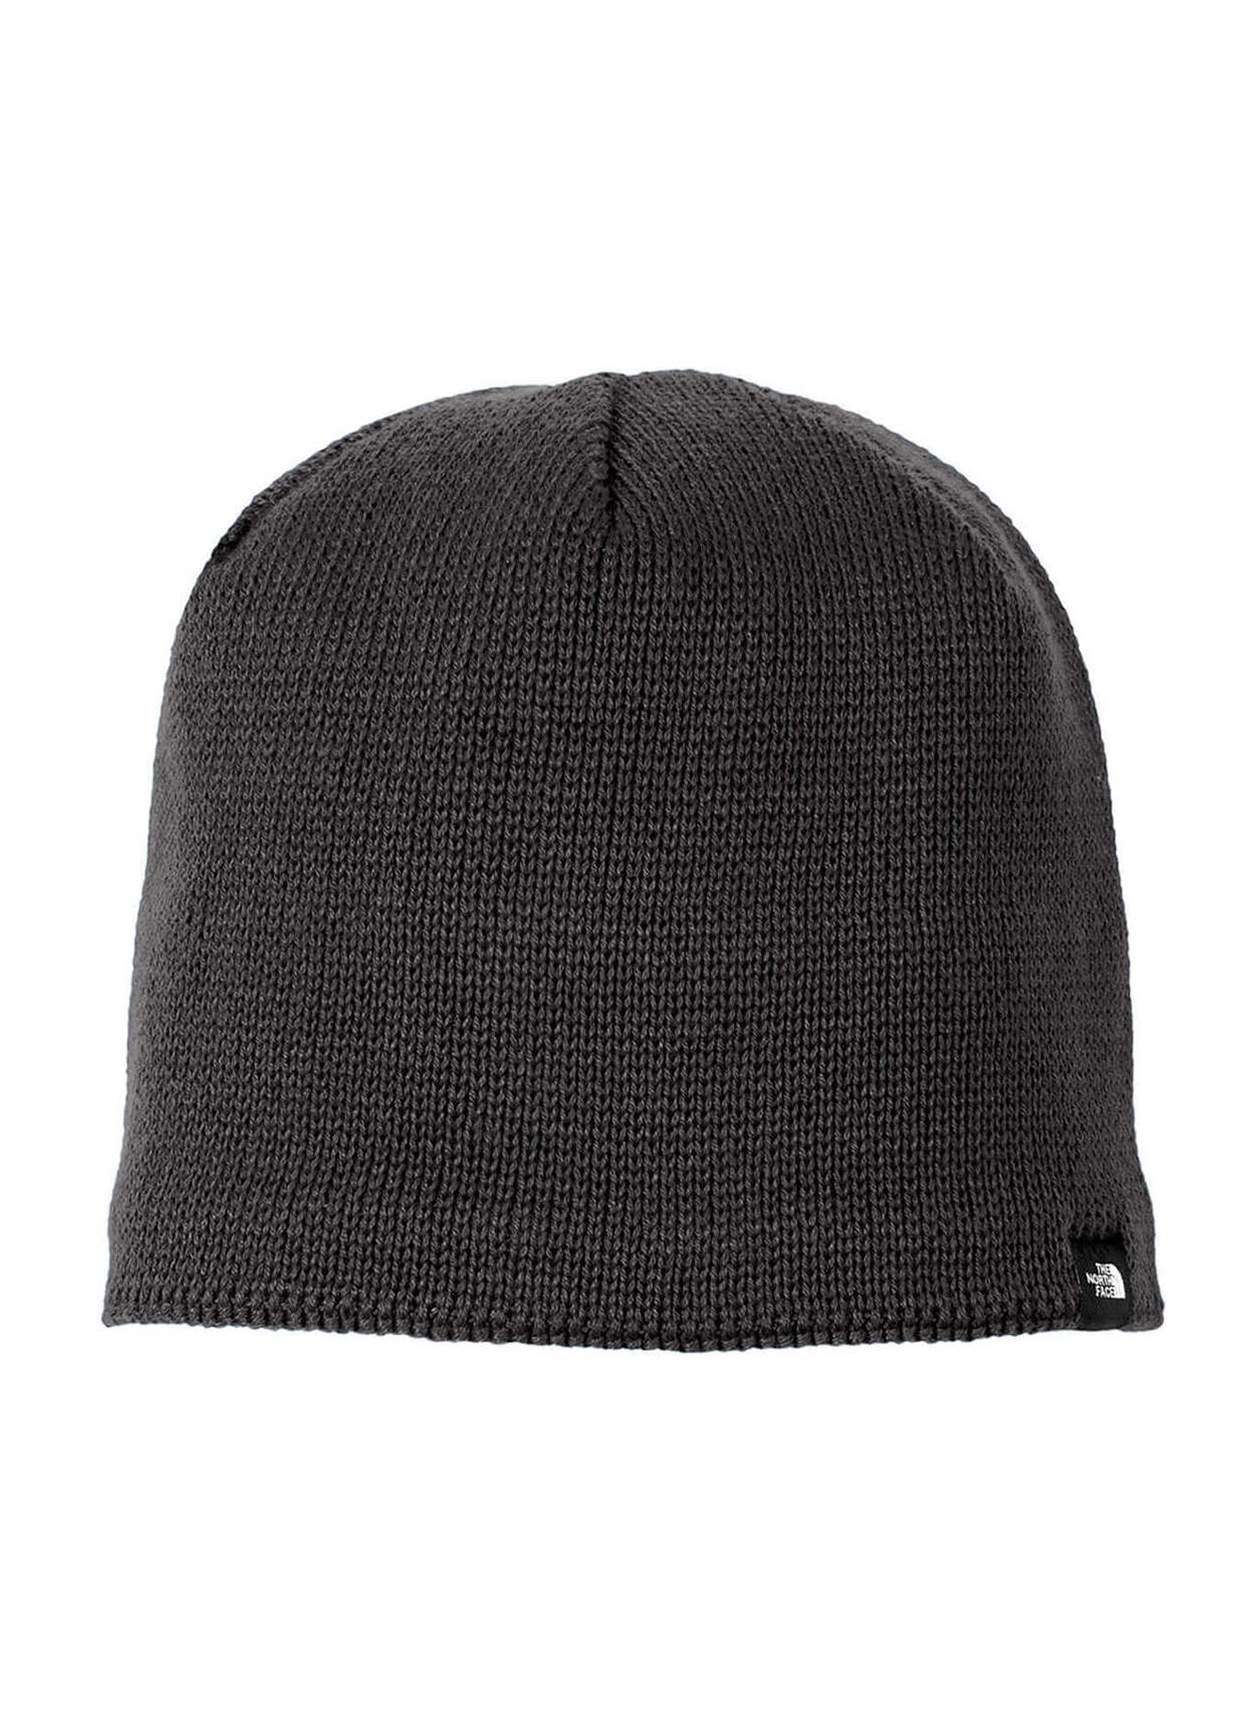 Beanie Face The North Mountain Heather TNF Dark North Grey Face The |